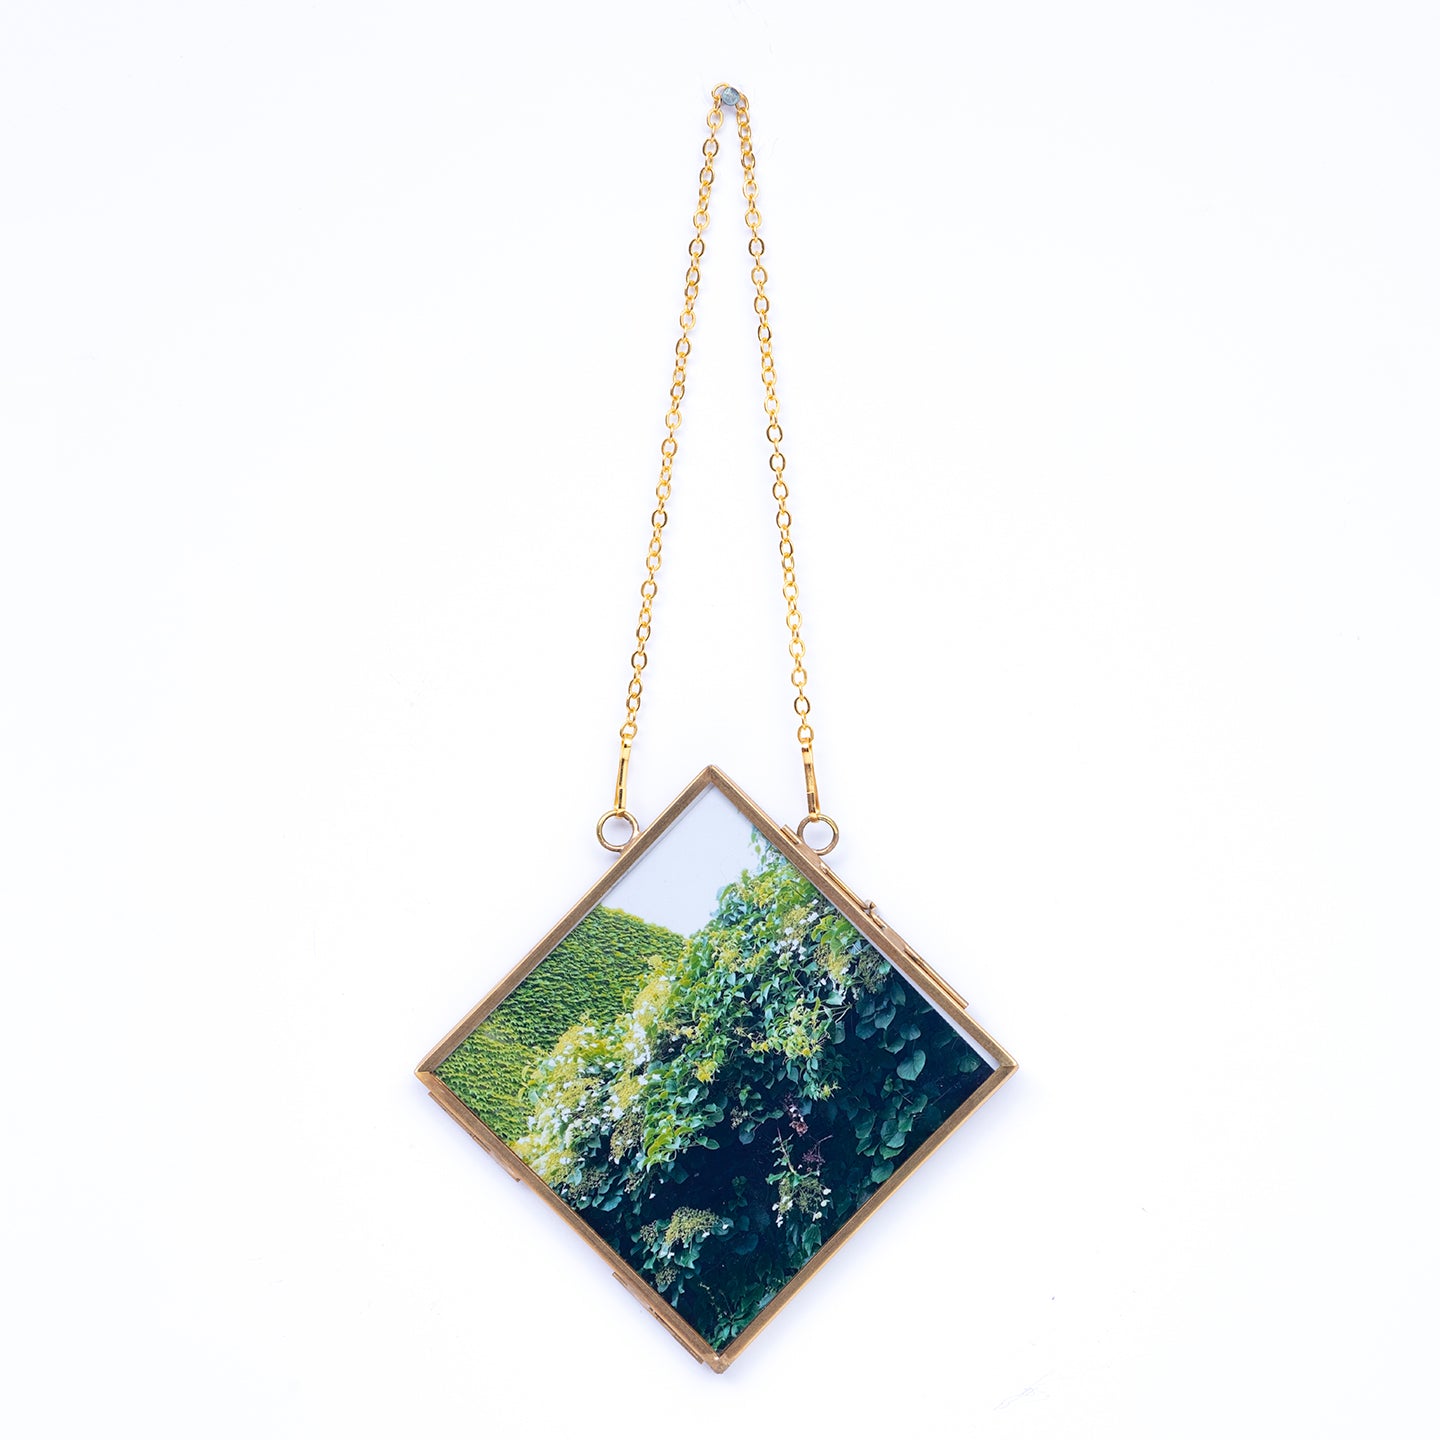 Diamond shaped frames with artistic images of nature title Wood U from Everyday Art Editions